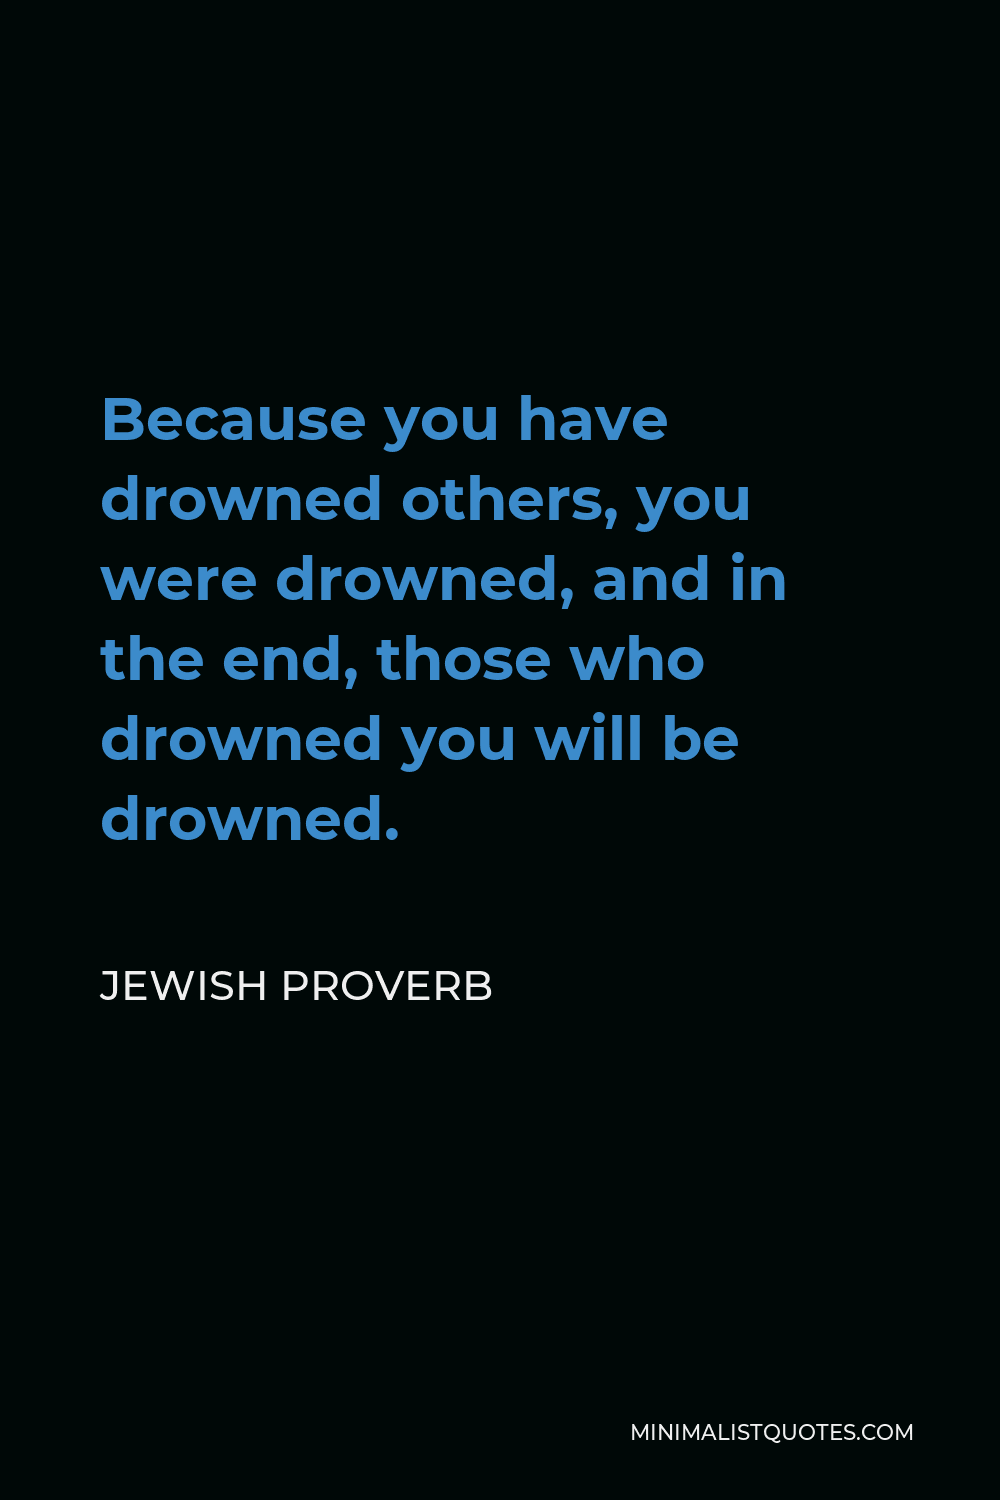 Jewish Proverb Quote - Because you have drowned others, you were drowned, and in the end, those who drowned you will be drowned.